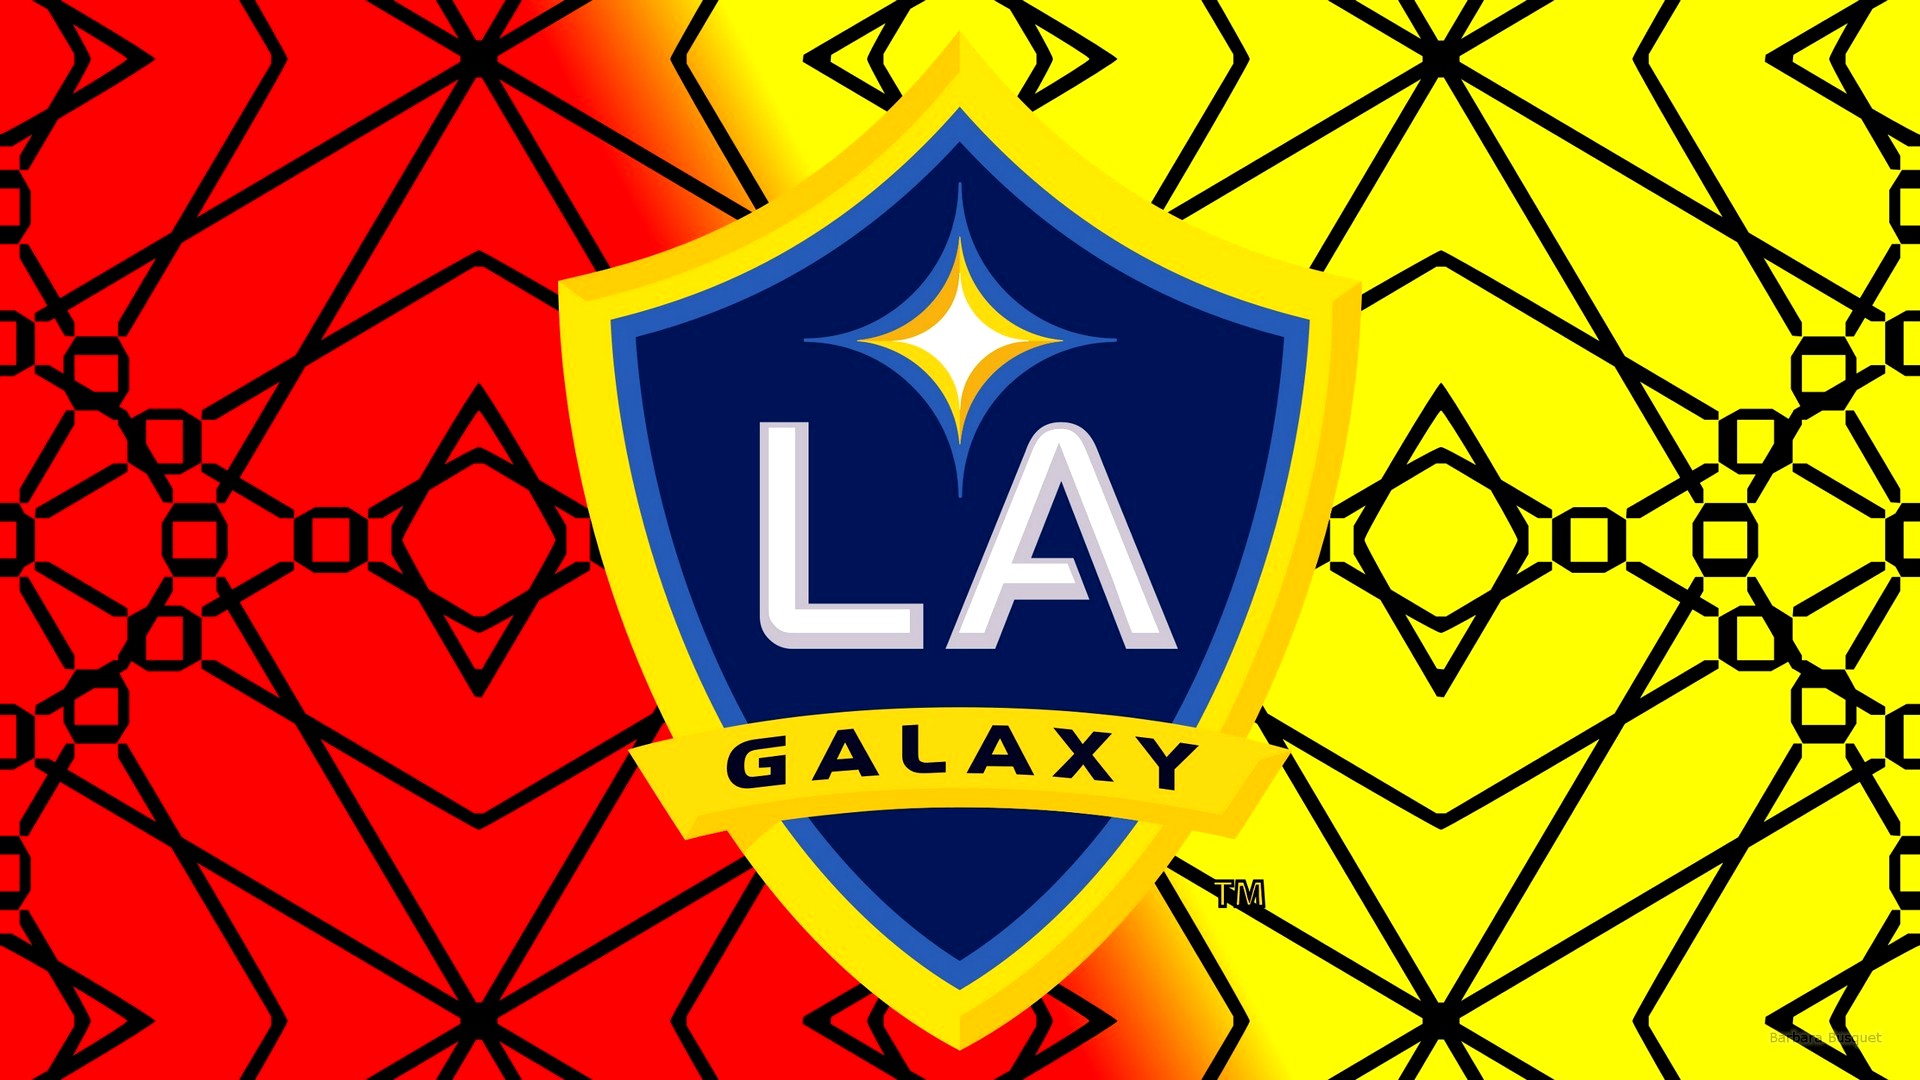 Los Angeles Galaxy Wallpaper with high-resolution 1920x1080 pixel. You can use this wallpaper for your Desktop Computers, Mac Screensavers, Windows Backgrounds, iPhone Wallpapers, Tablet or Android Lock screen and another Mobile device